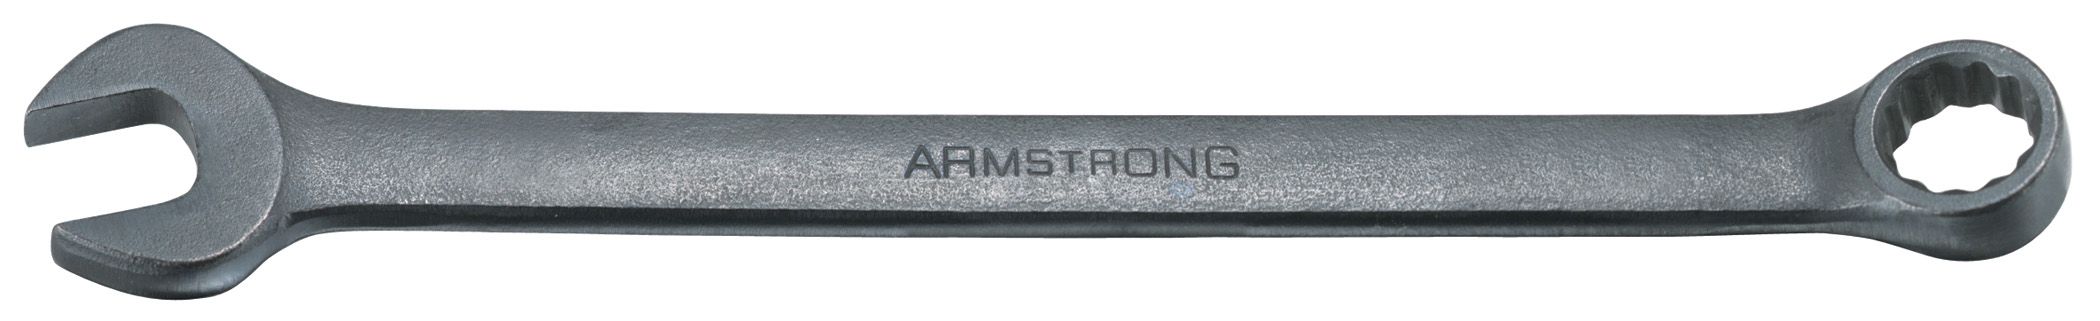 Armstrong 1-3/4 in. 12 pt. Black Oxide Long Combination Wrench